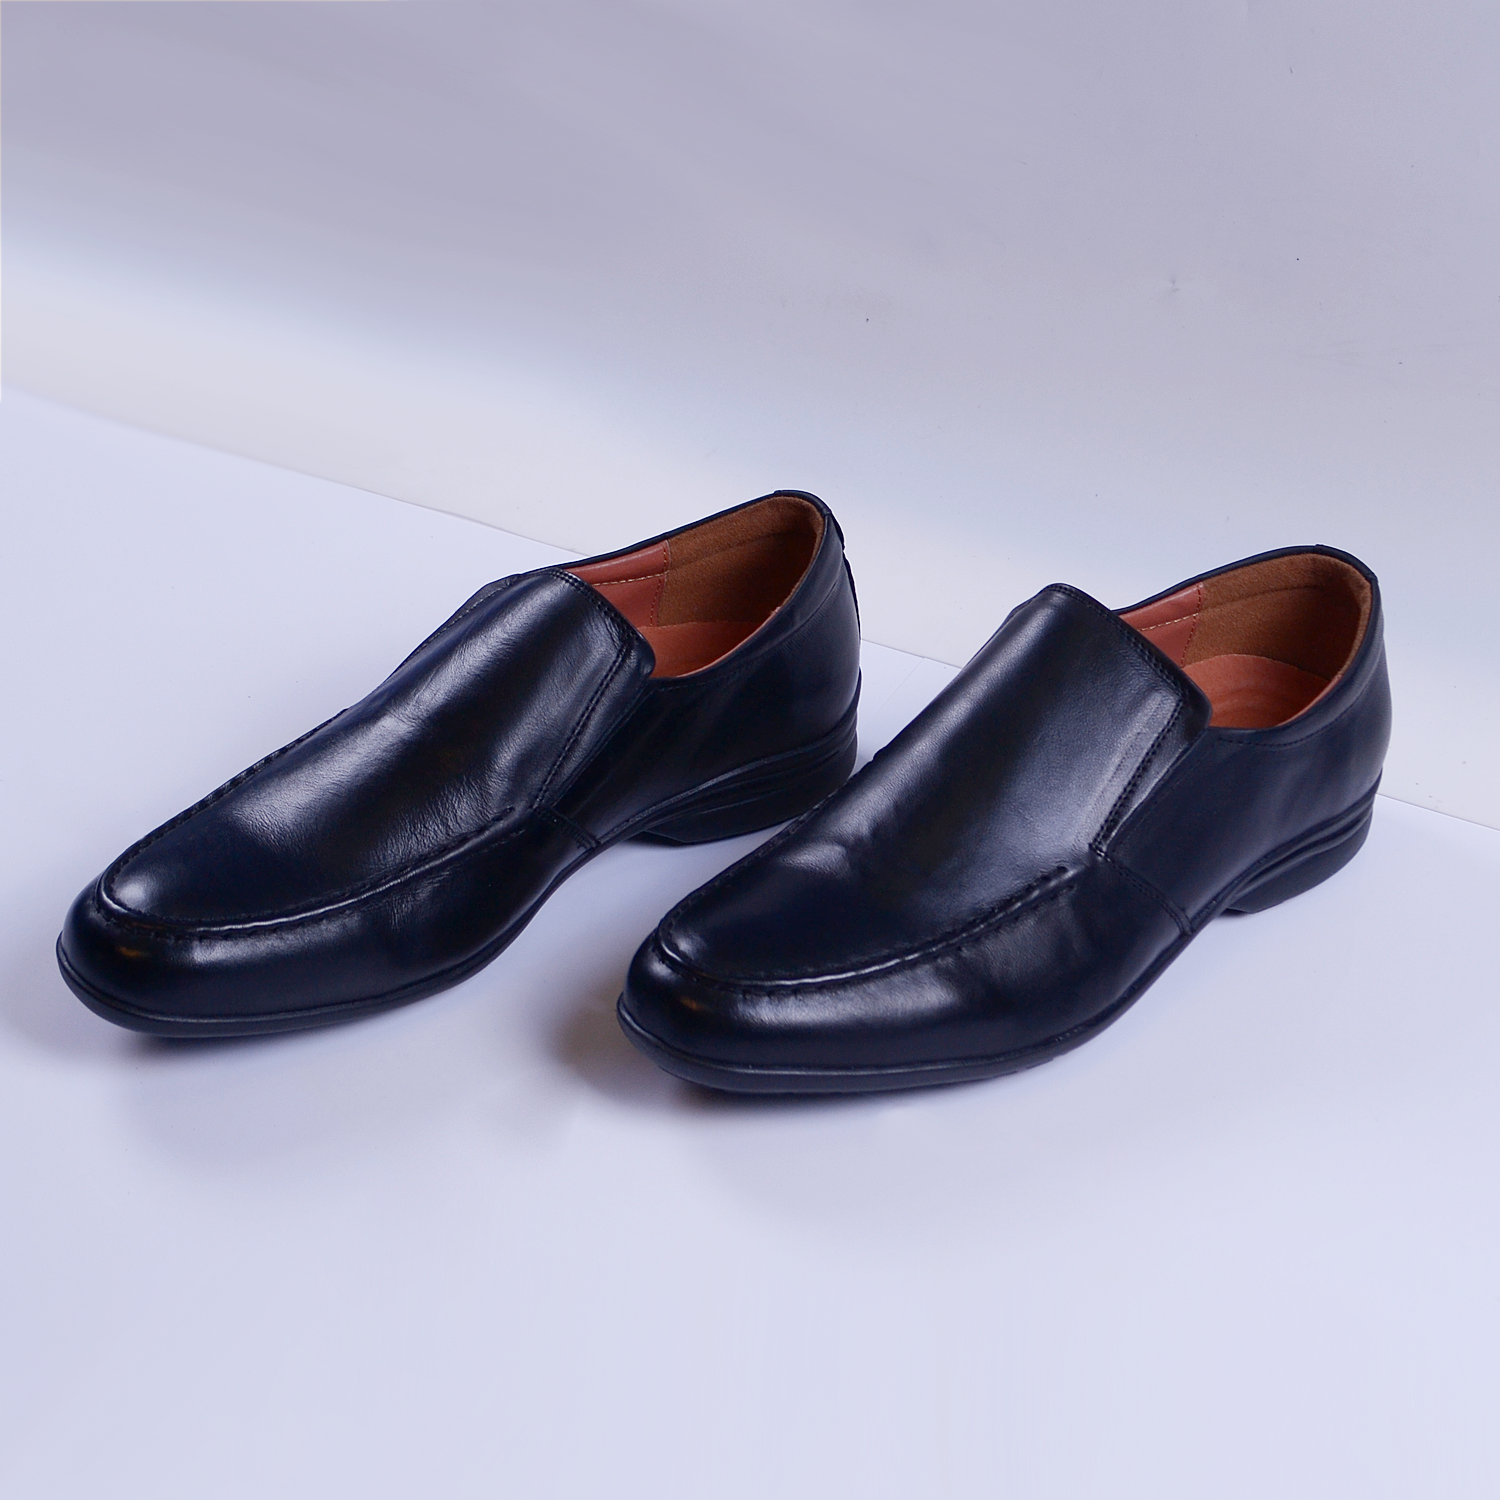 rusty lopez black shoes for ladies